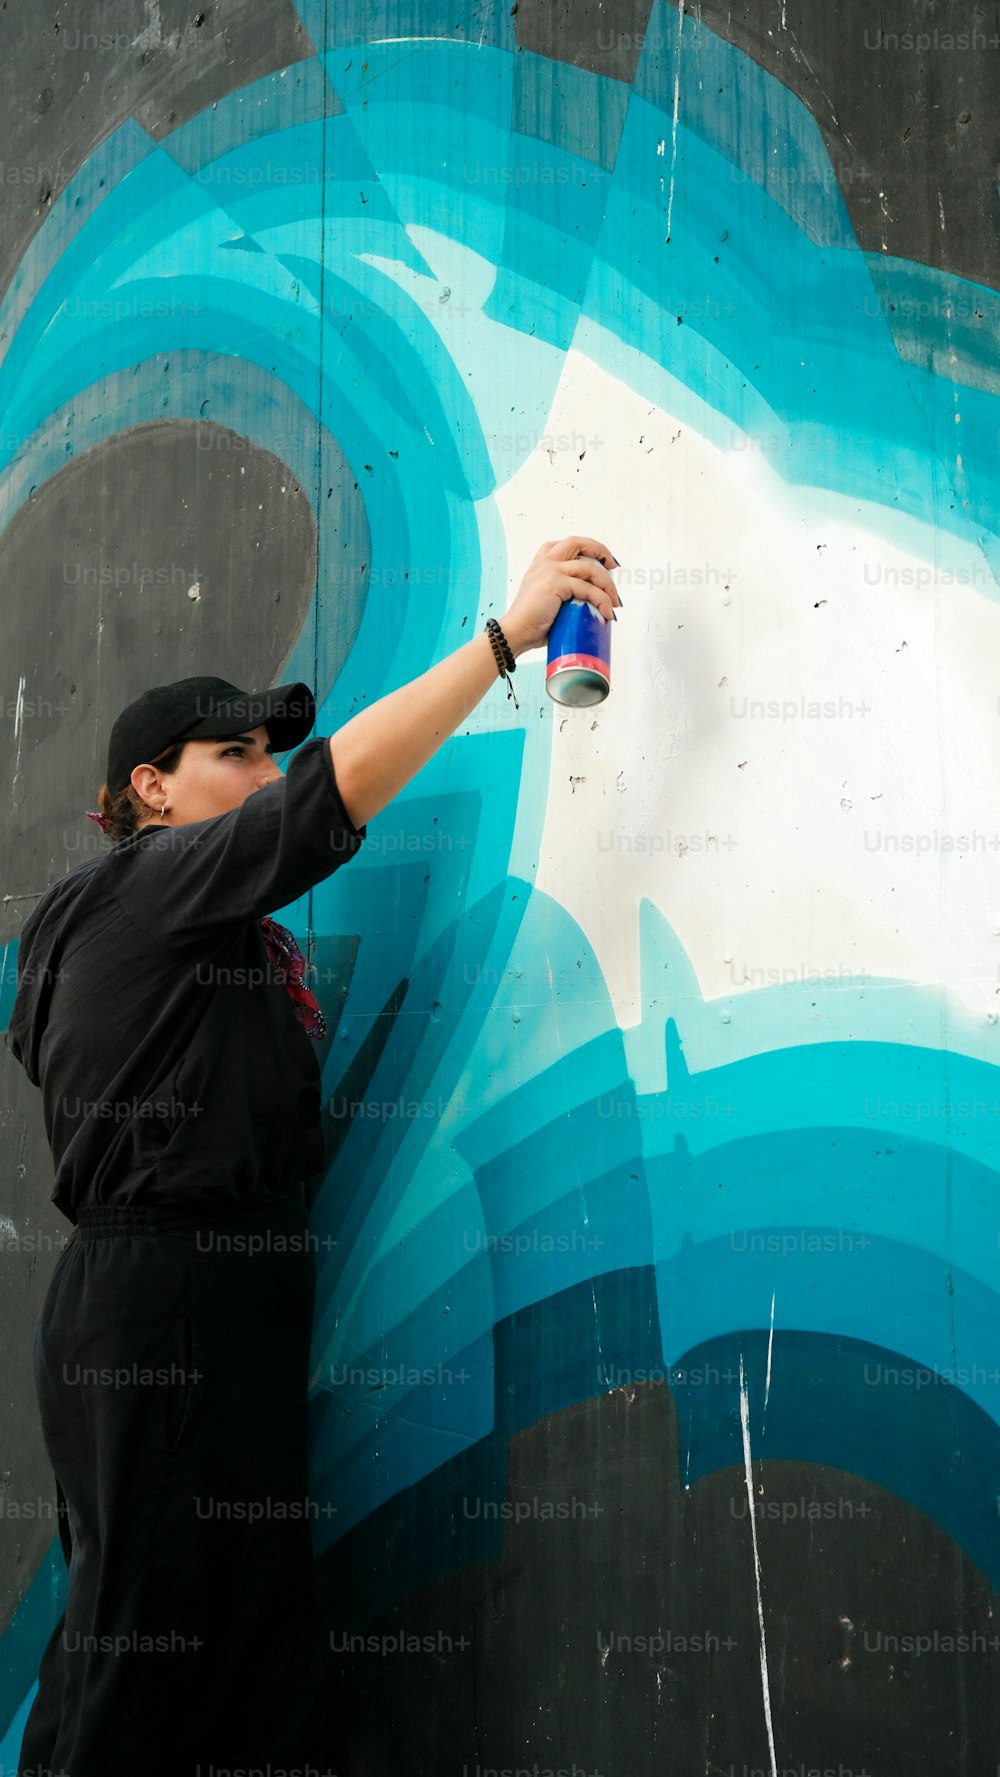 a man spray painting a mural on a wall